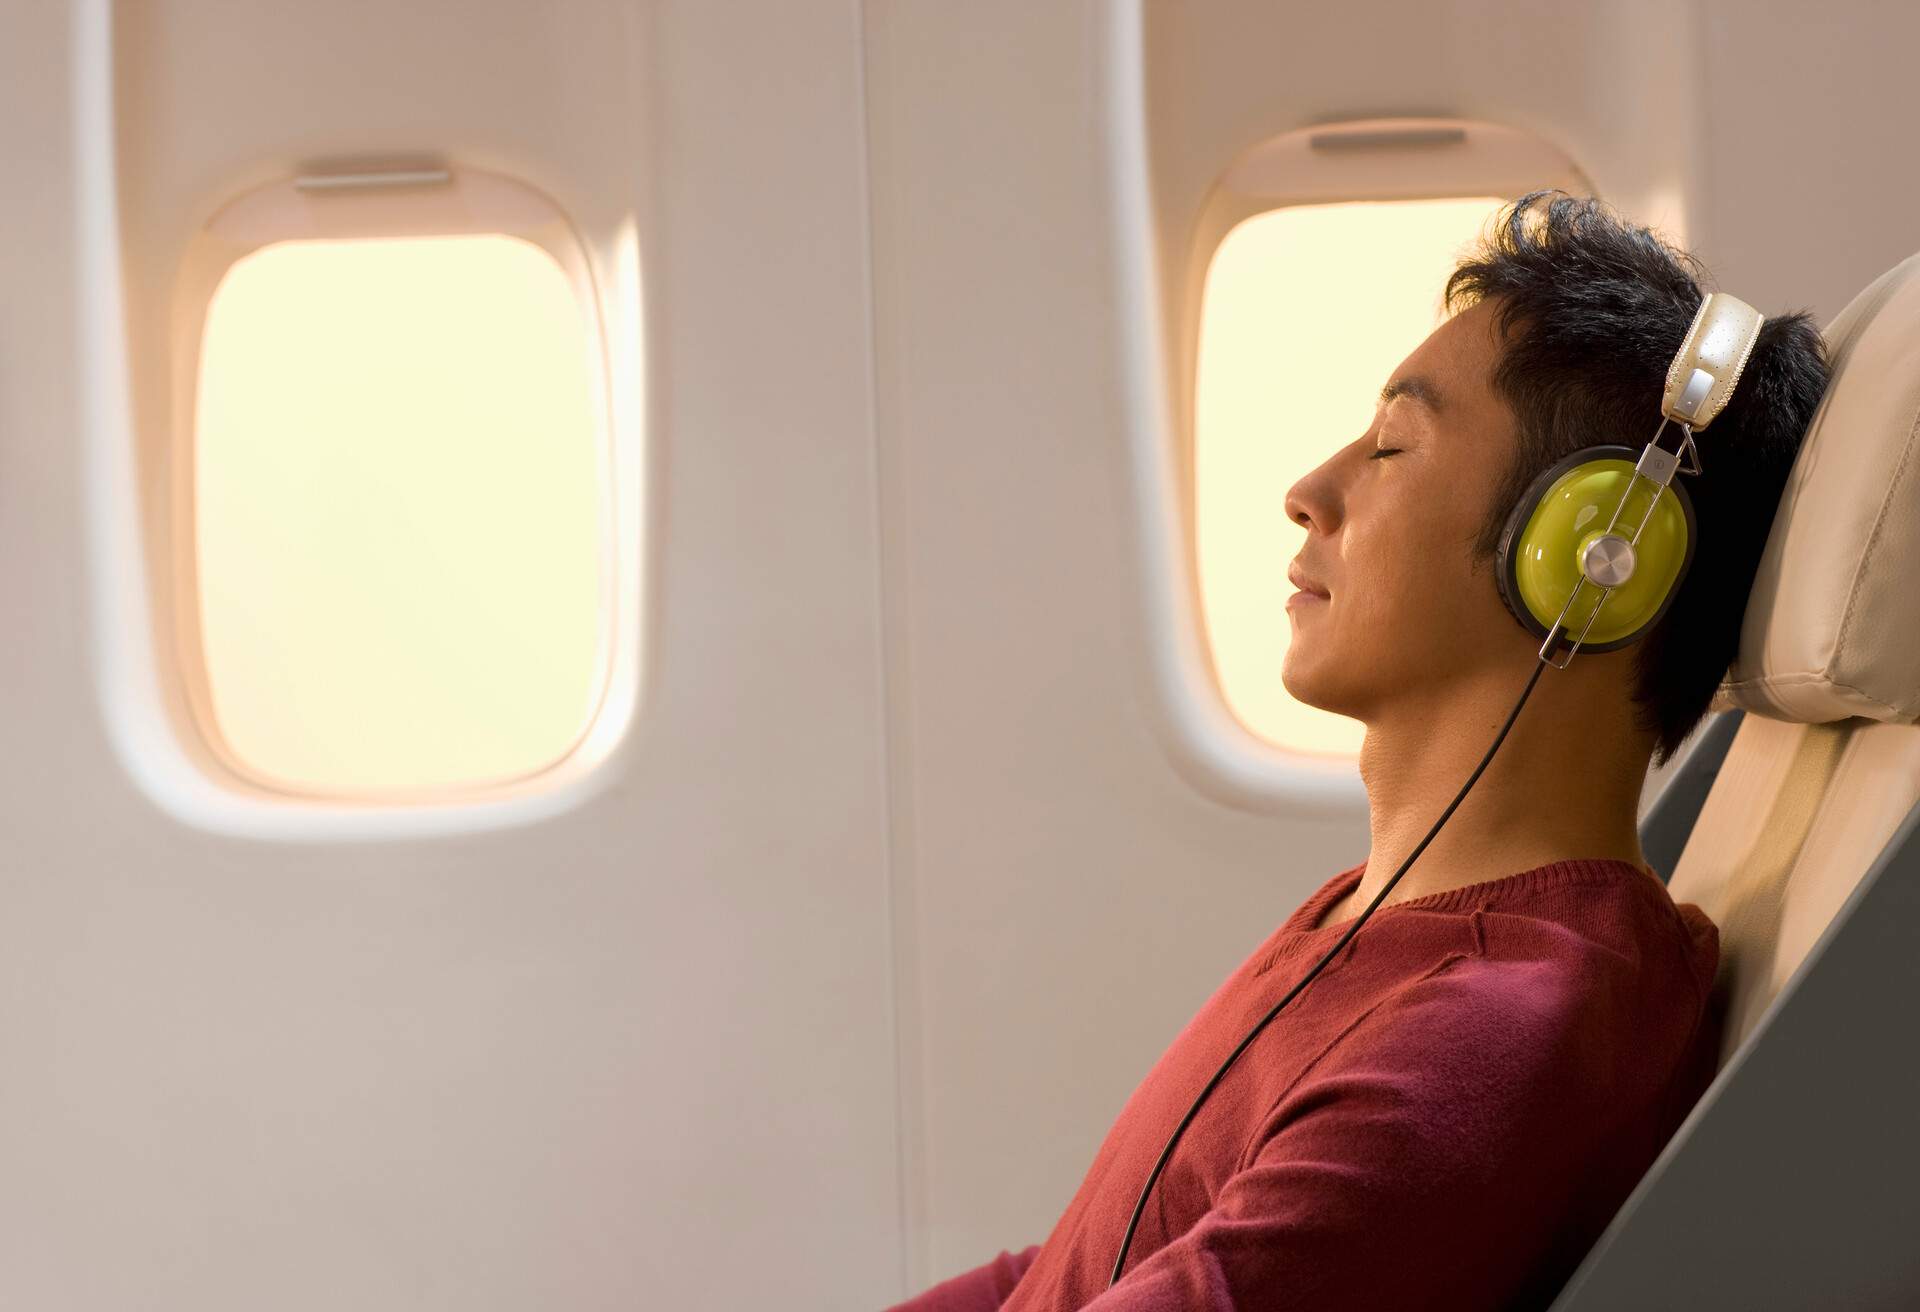 AIRPLANE_AIRLINE_PERSON_HEADPHONES_INFLIGHT